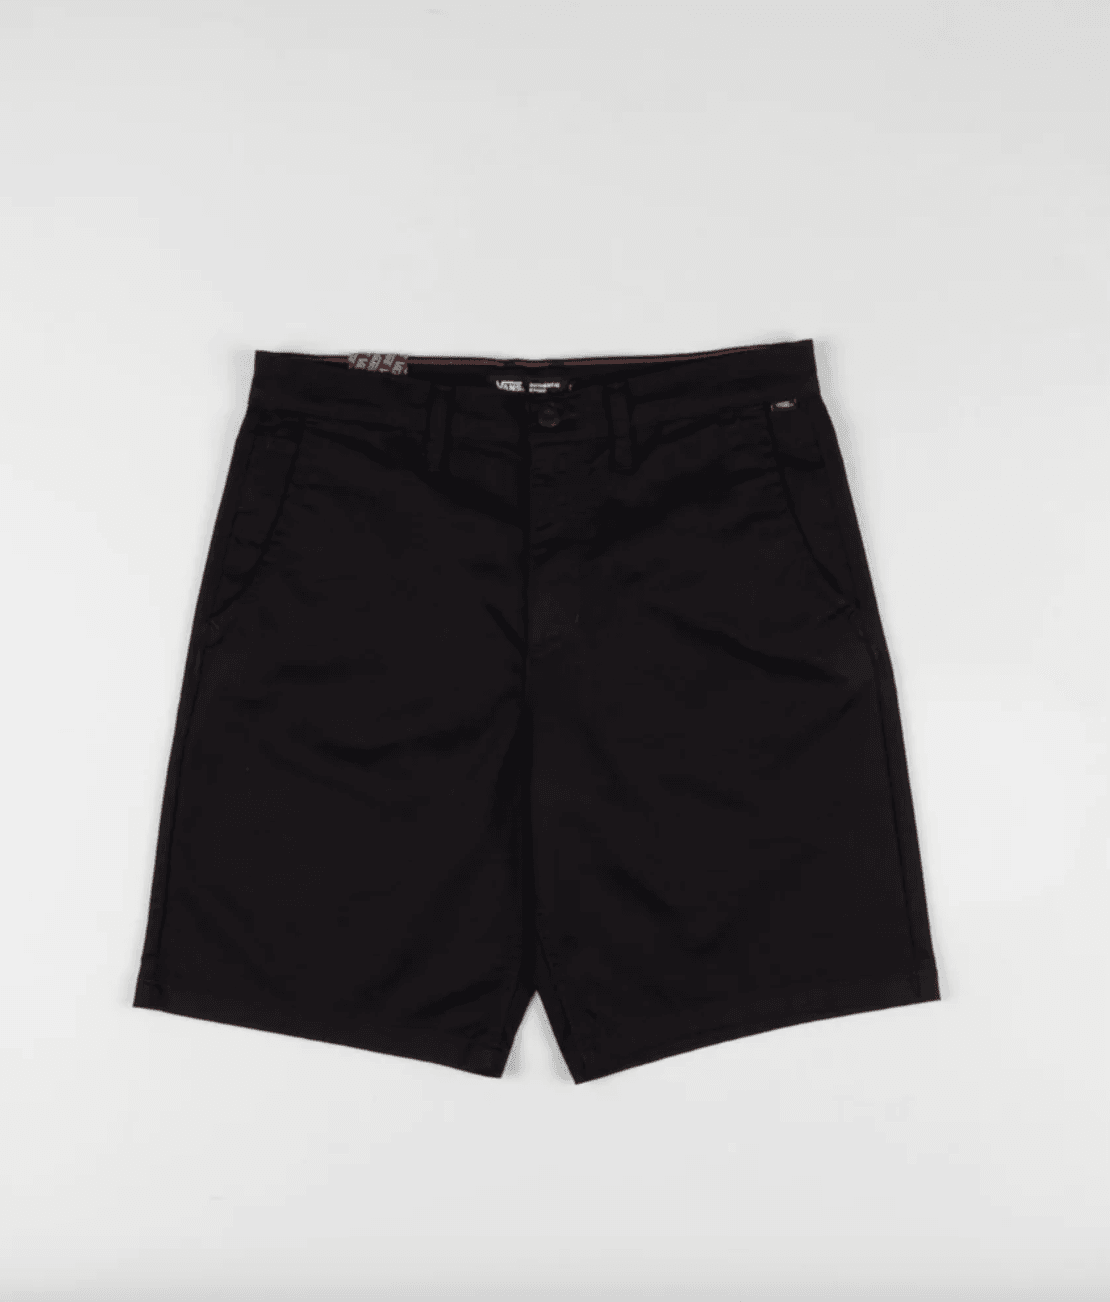 MN AUTHENTIC CHINO RELAXED SHORT - VN0A5FJXBLK1